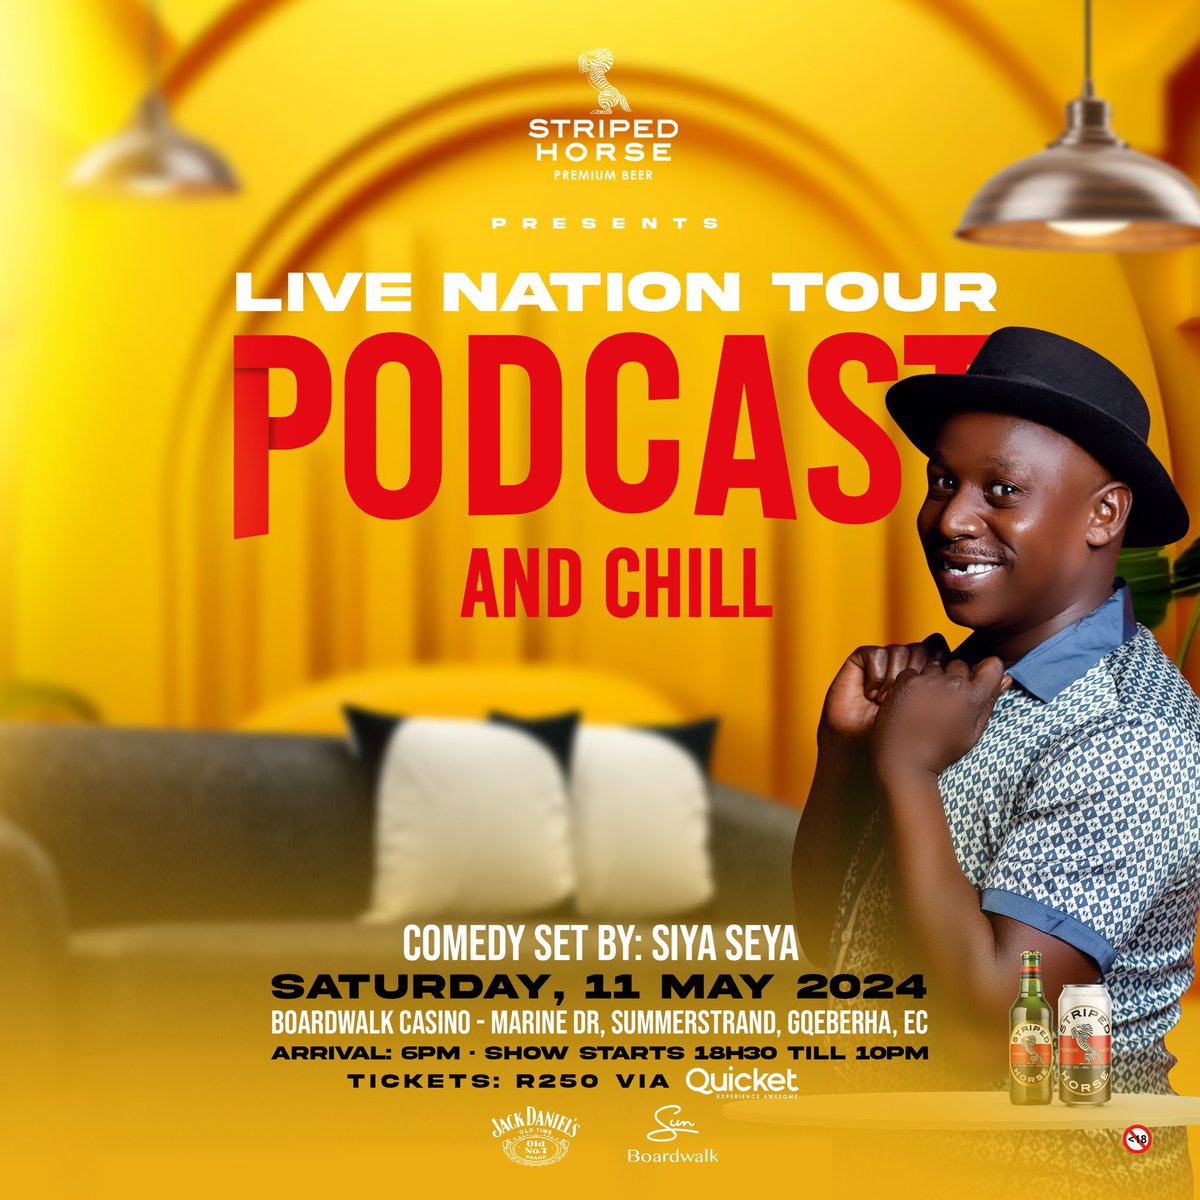 Ziyakhala ke manje 🔥 Will be laughing in Capital Letters this Saturday as we got @siyaseyacomedy as our comedian for the night 🔥 Podcast and Chill is making their way to Gqeberha ✈️ Ni Ready? Click link to secure your spot quicket.co.za/events/250862-…